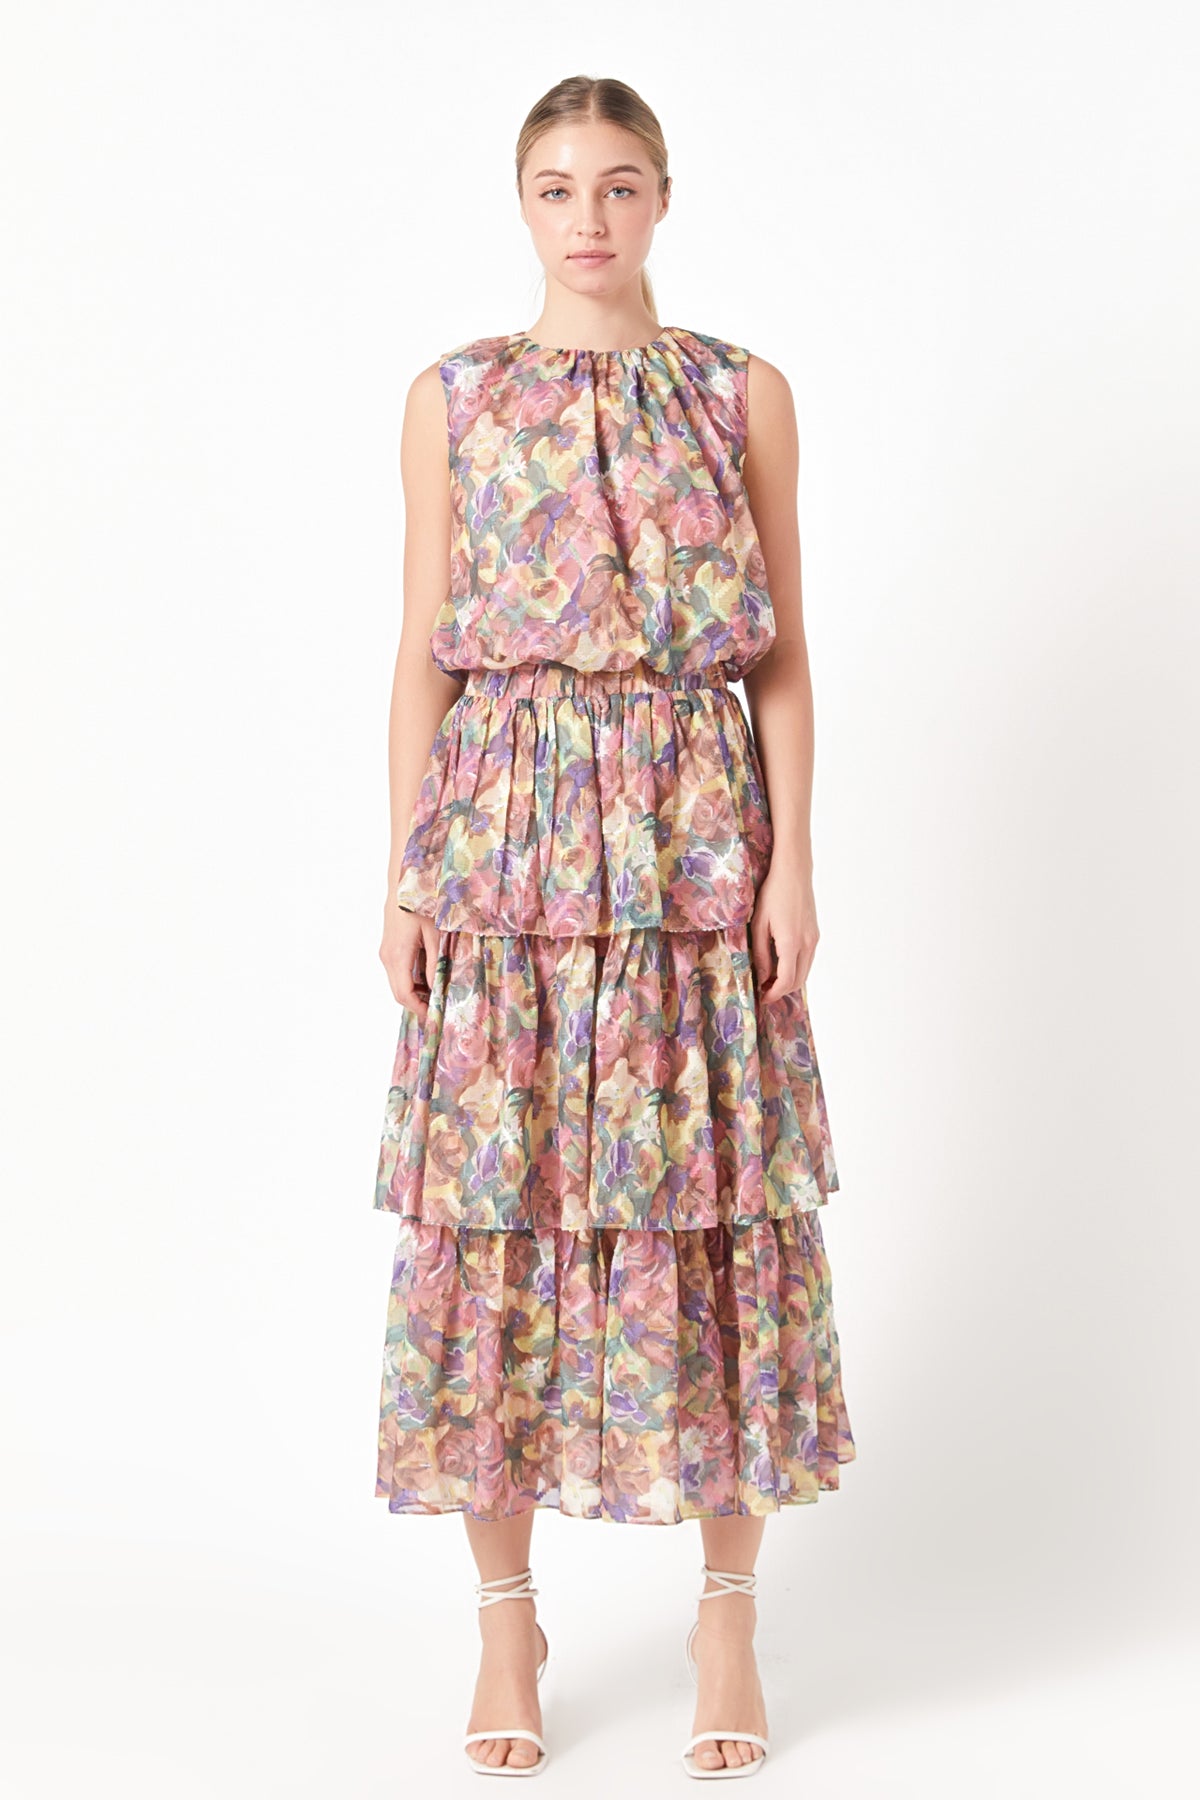 ENDLESS ROSE - Floral Tiered Maxi Skirt - SKIRTS available at Objectrare